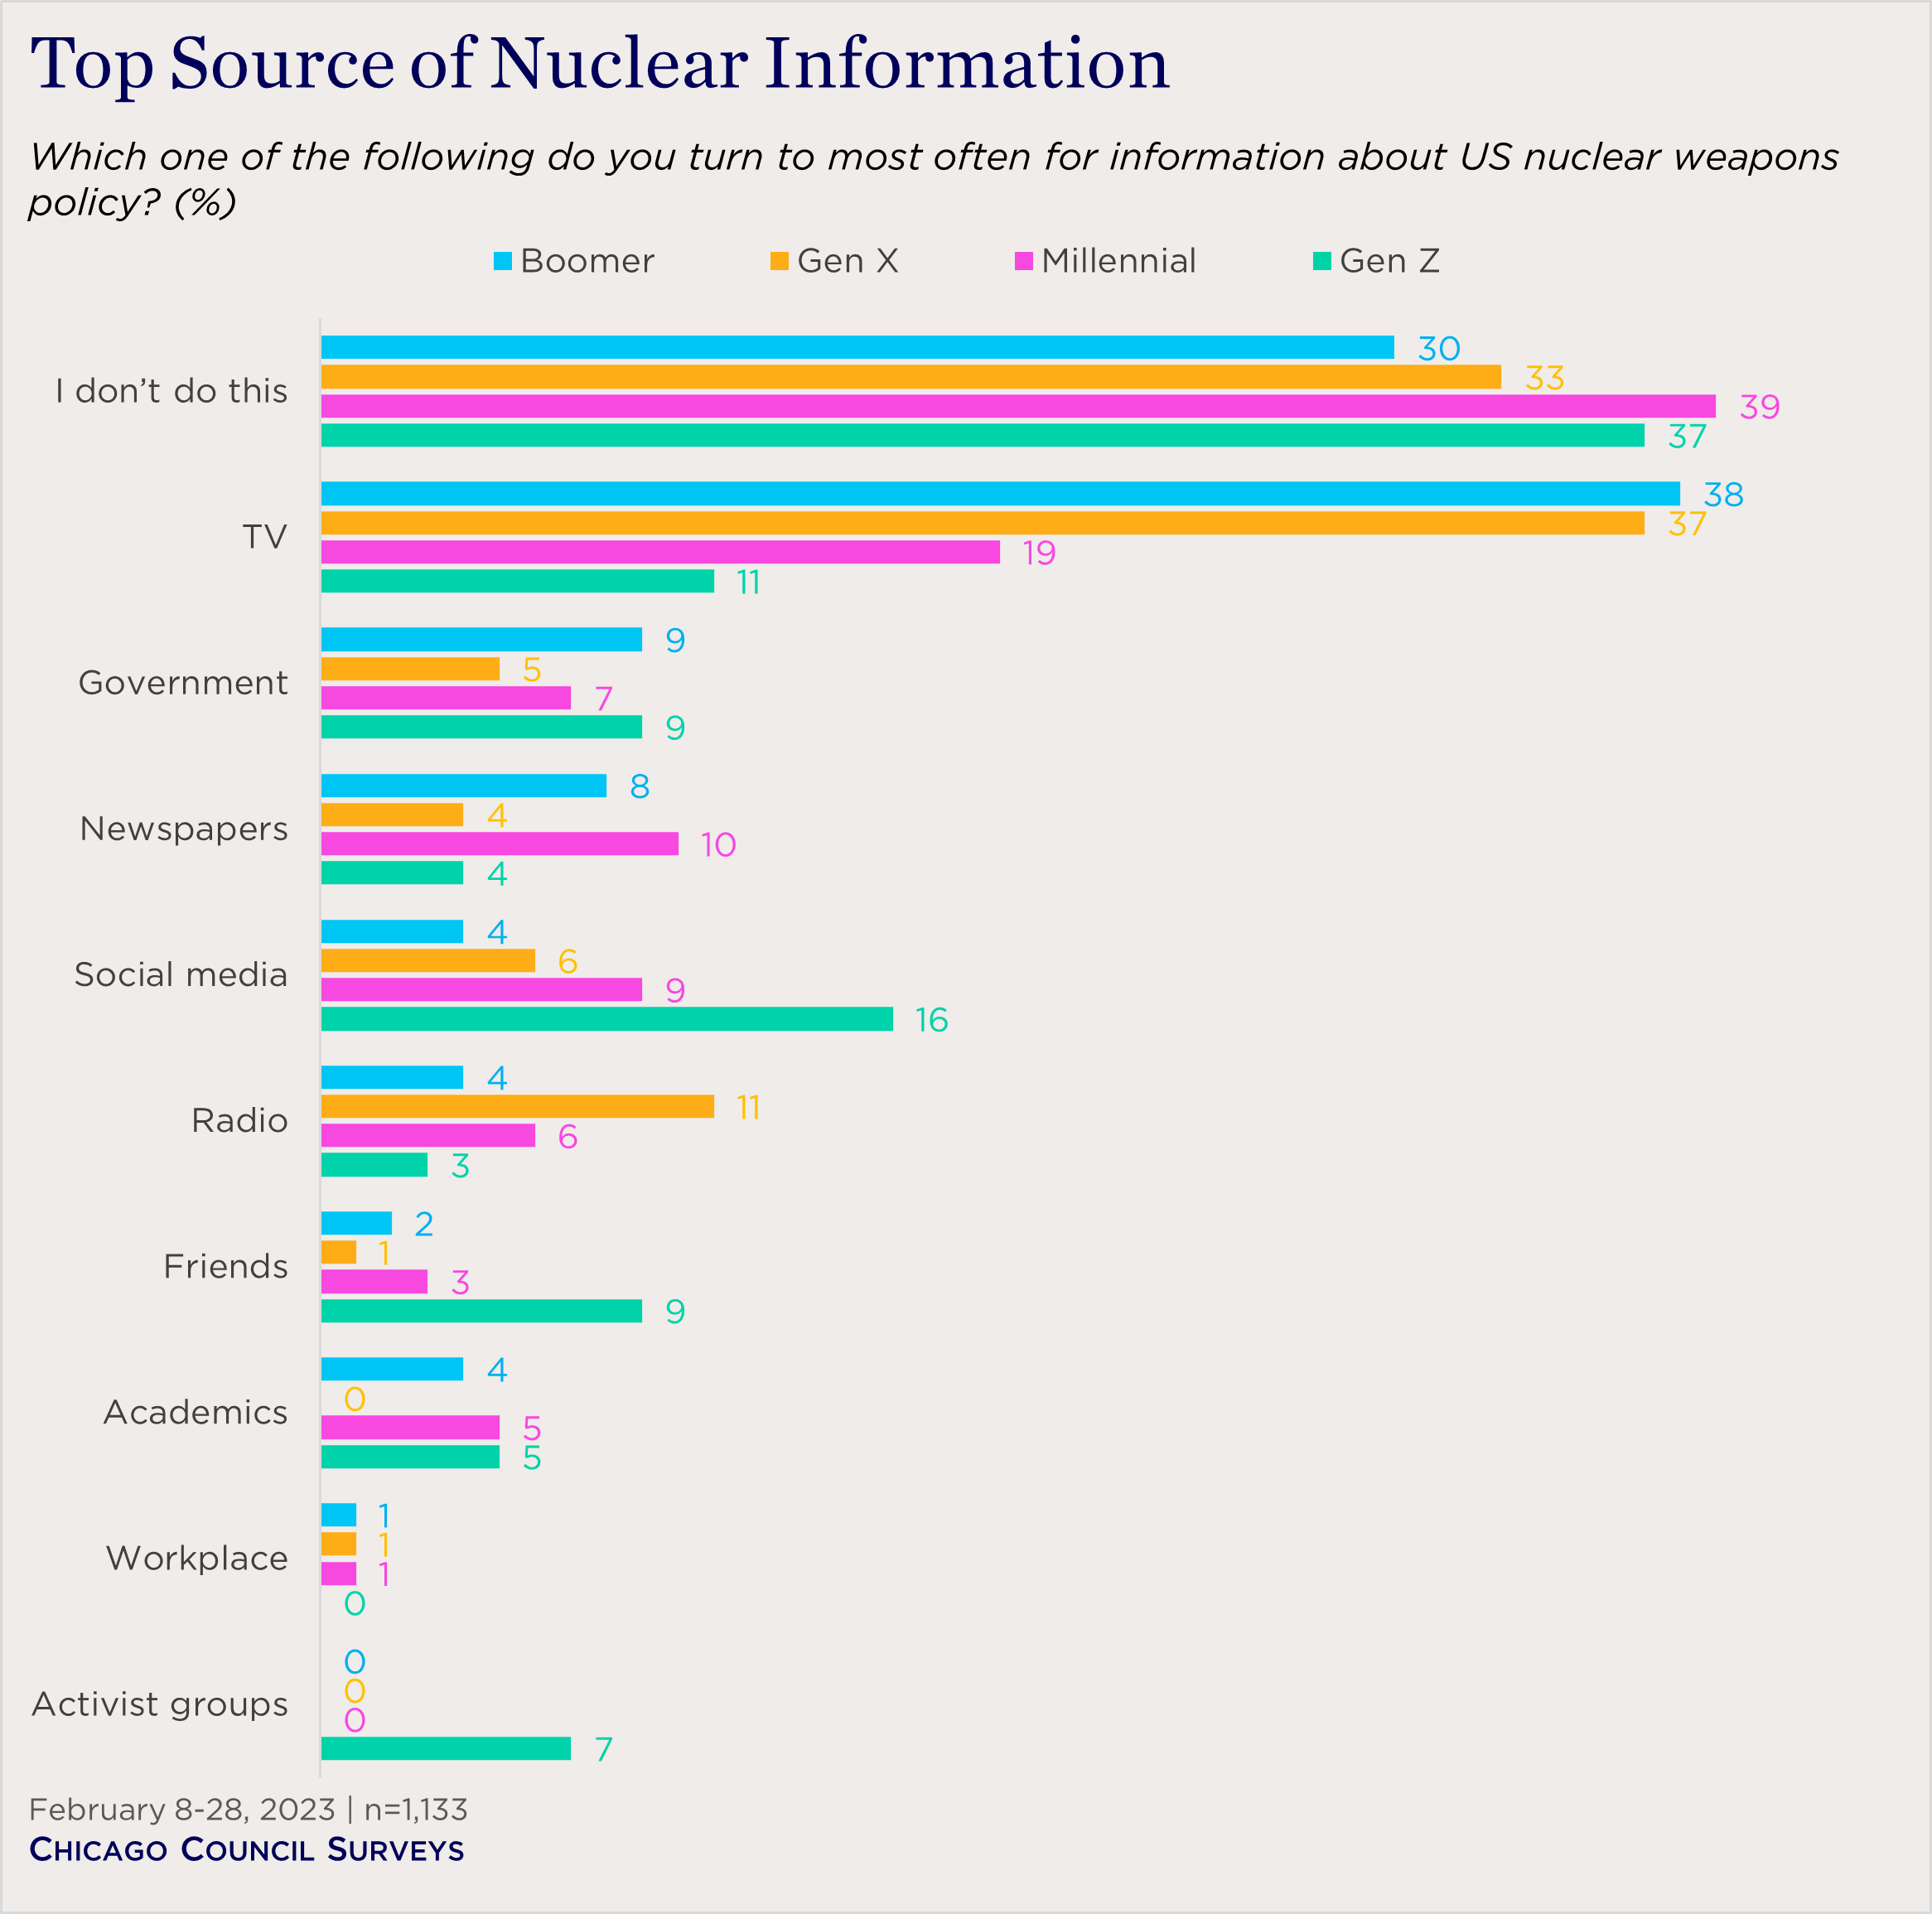 "bar chart showing top source of nuclear information by generation"